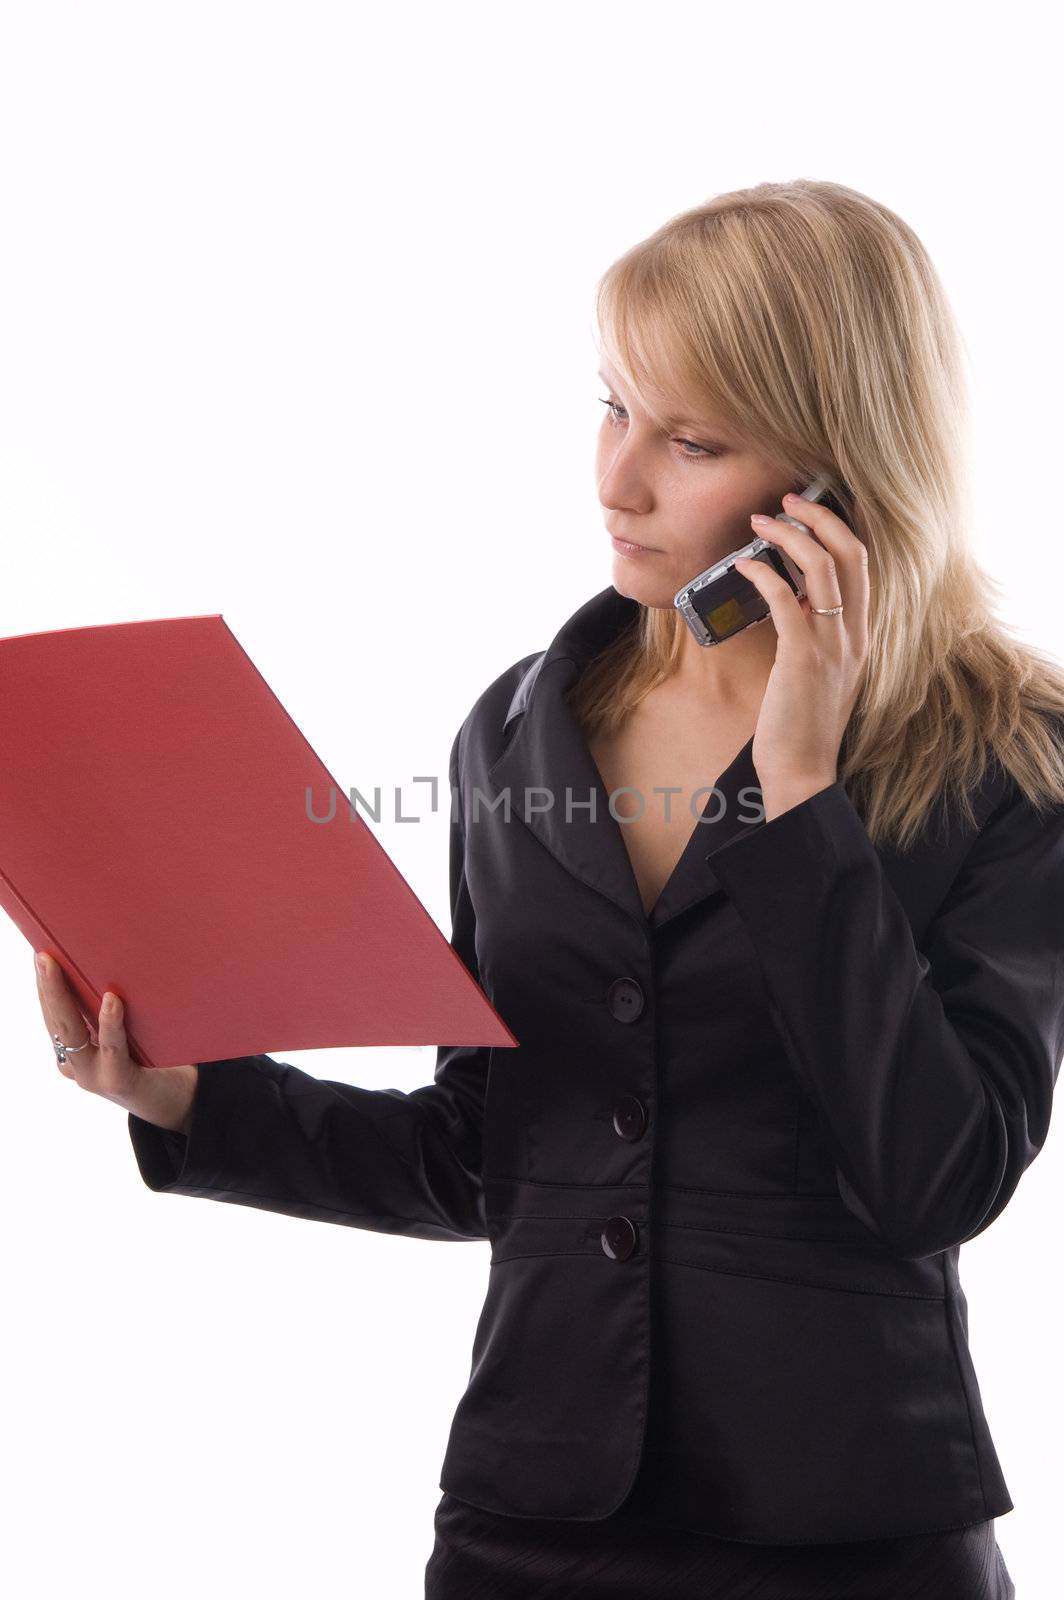 The businesswoman with a folder by andyphoto